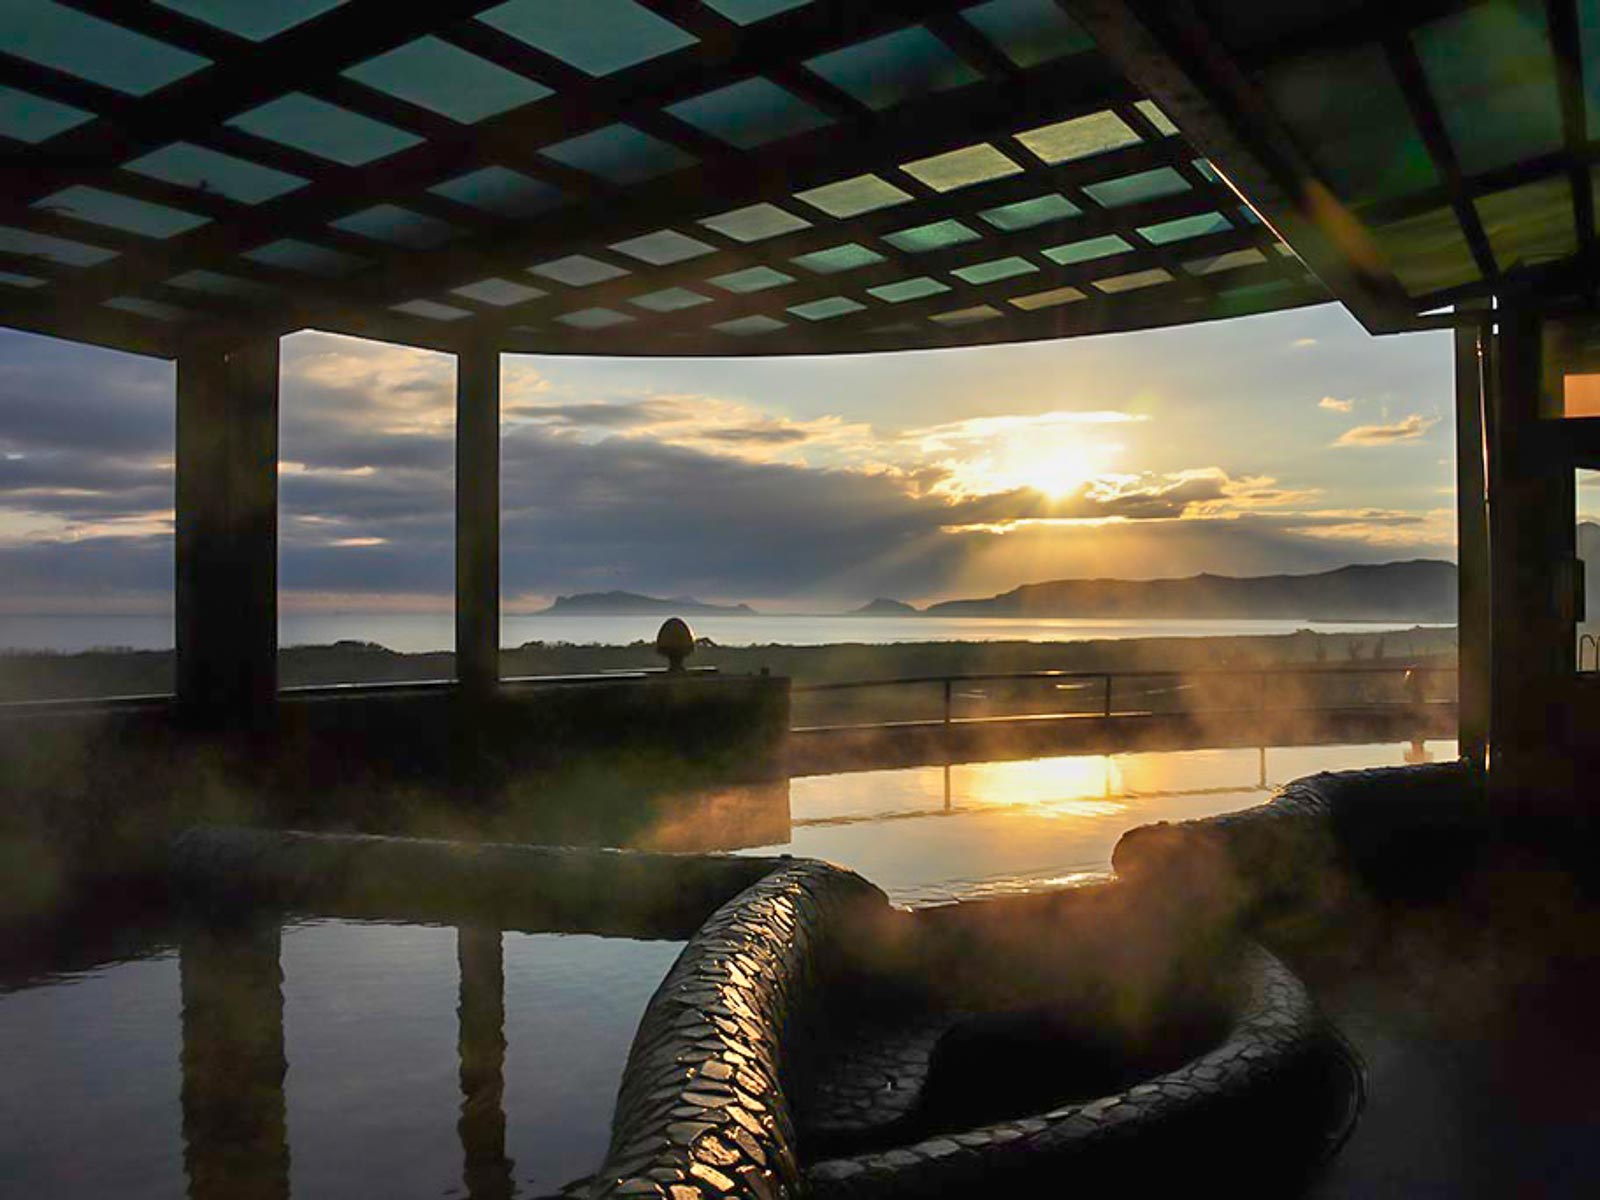 The sun rises over an outdoor hot spring pool in Jinshan.